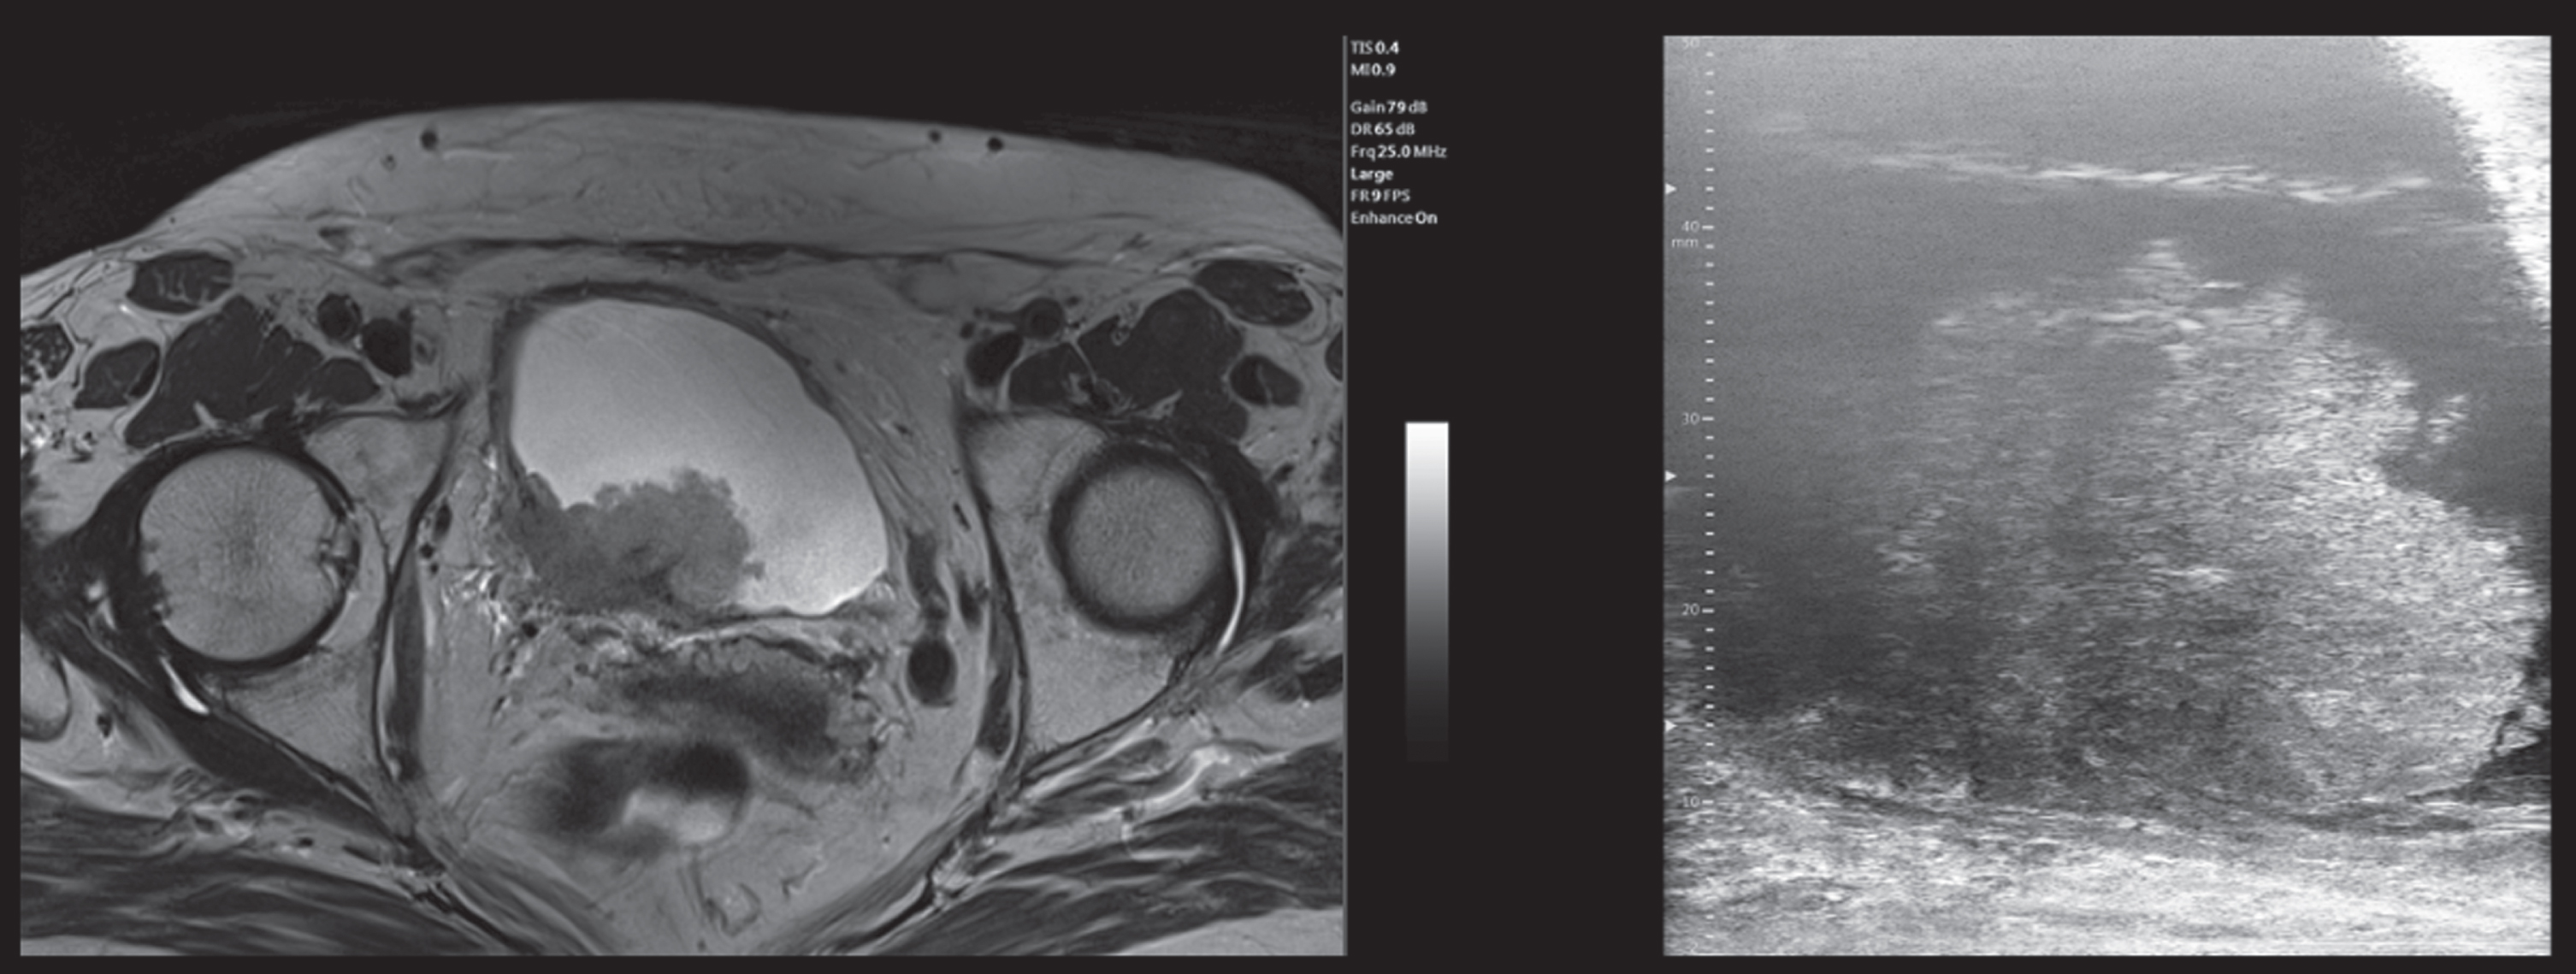 mUS and MRI imaging comparison, patient 1. In the mUS the tumor disrupts the three layer structure showing a mixed hypo and hyperechoic pattern and at MRI the tumor extends beyond the bladder wall. In both techniques a single large stalk can be detected. (abbreviations: mUS: microultrasound; MRI: magnetic resonance imaging).